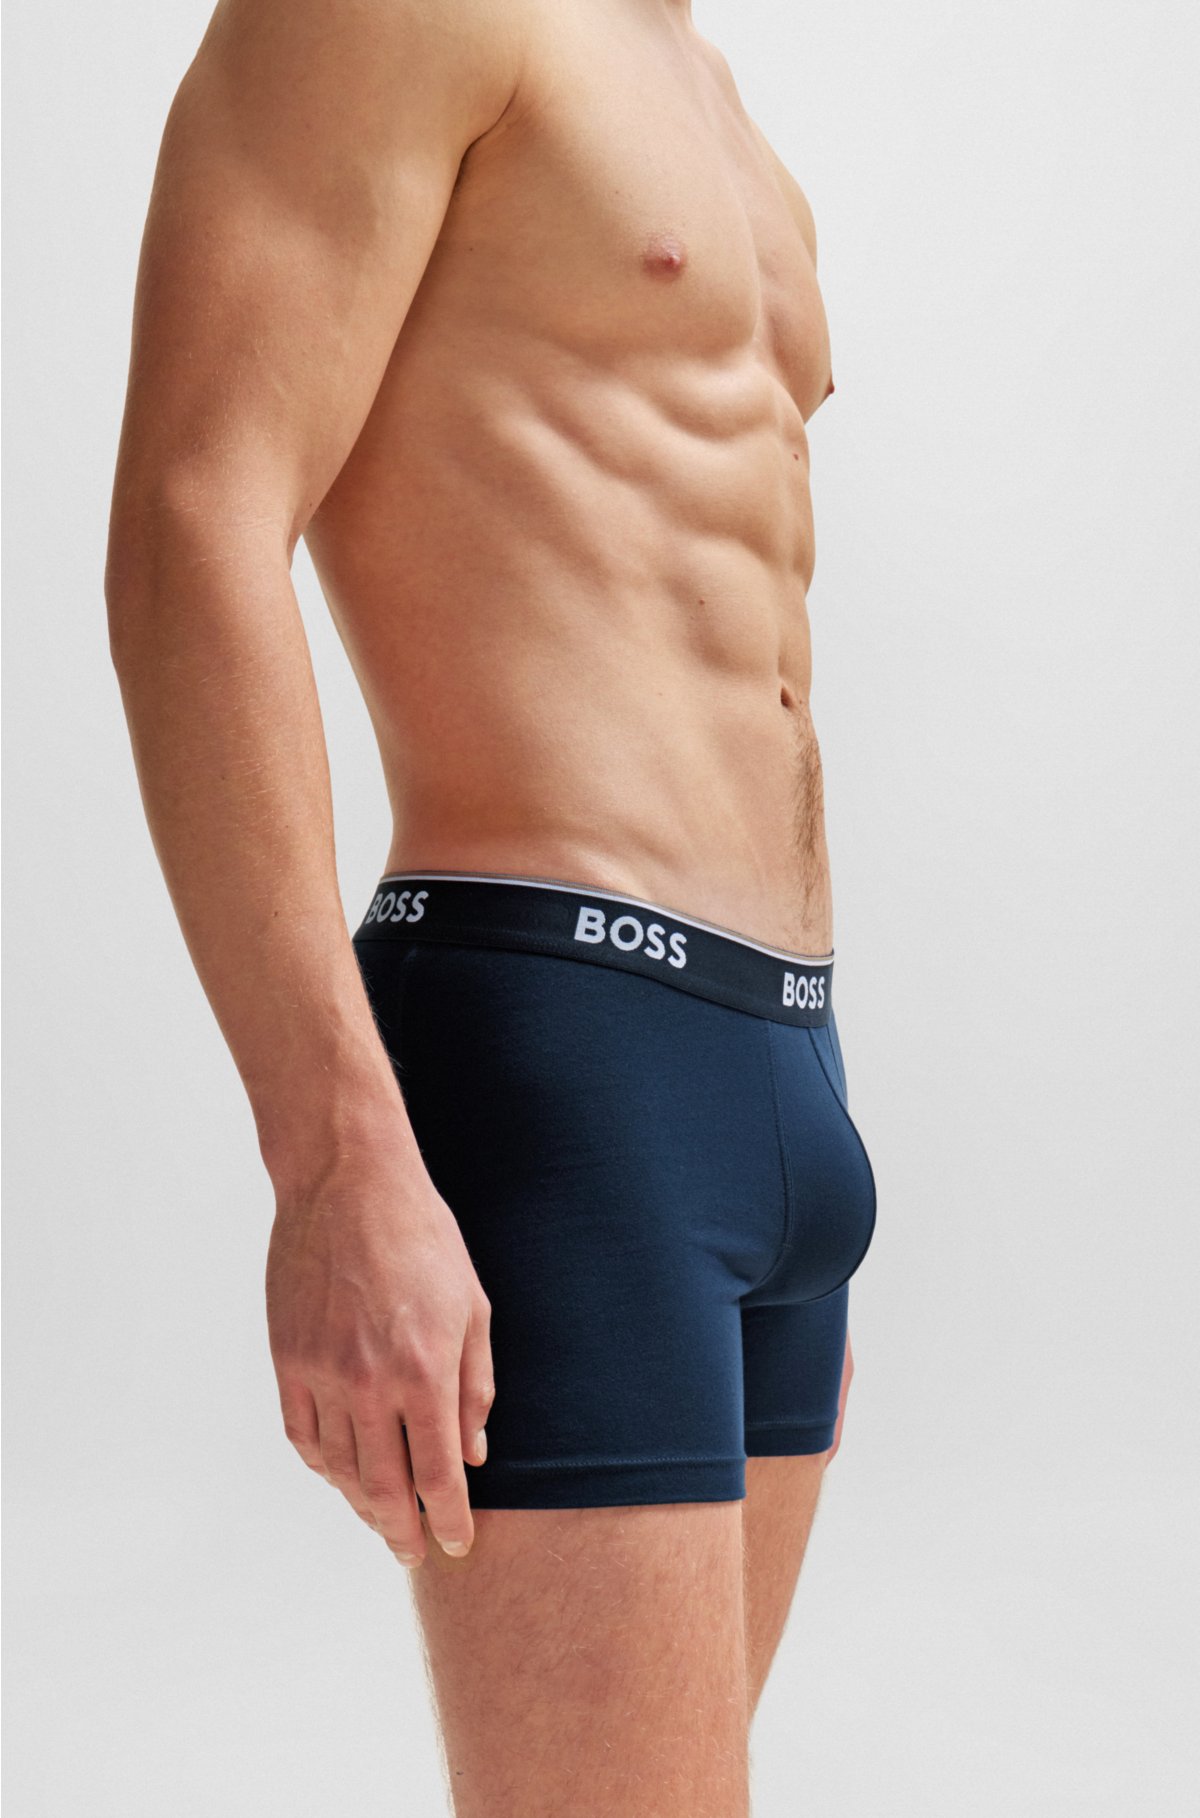 BOSS boxer Three-pack - logos briefs stretch-cotton of with